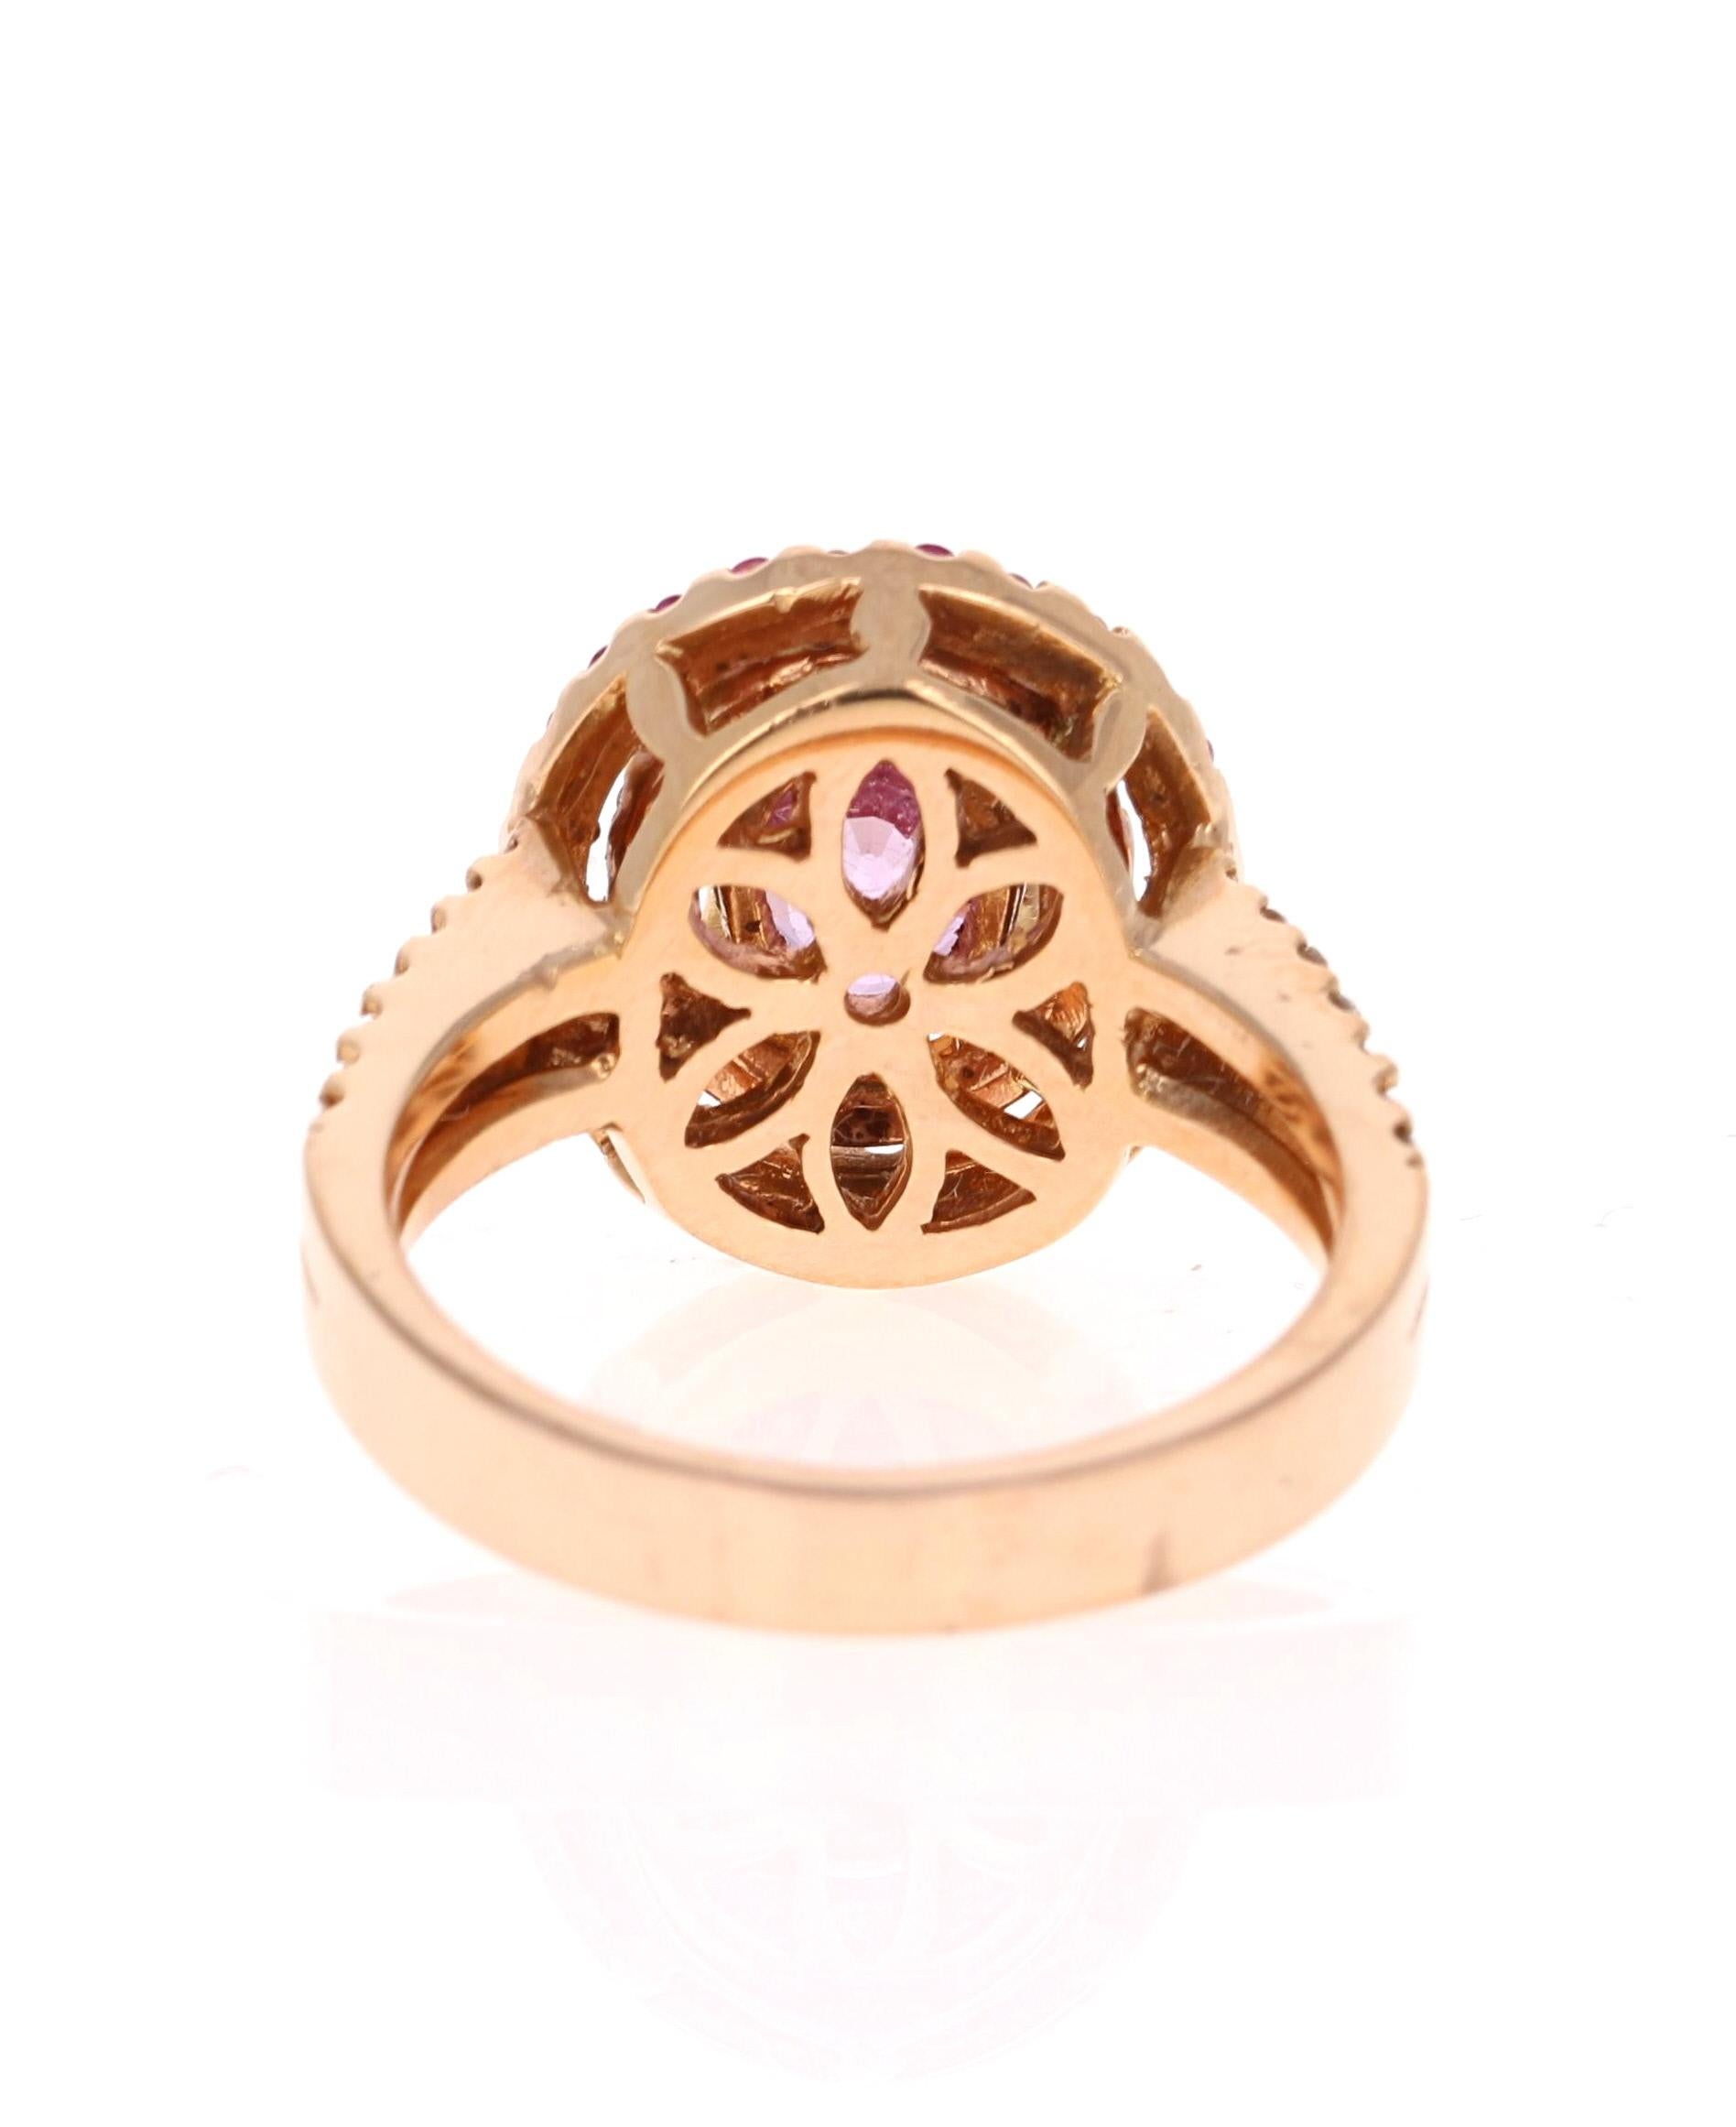 2.68 Carat Pink Sapphire Diamond 14 Karat Rose Gold Ring In New Condition For Sale In Los Angeles, CA